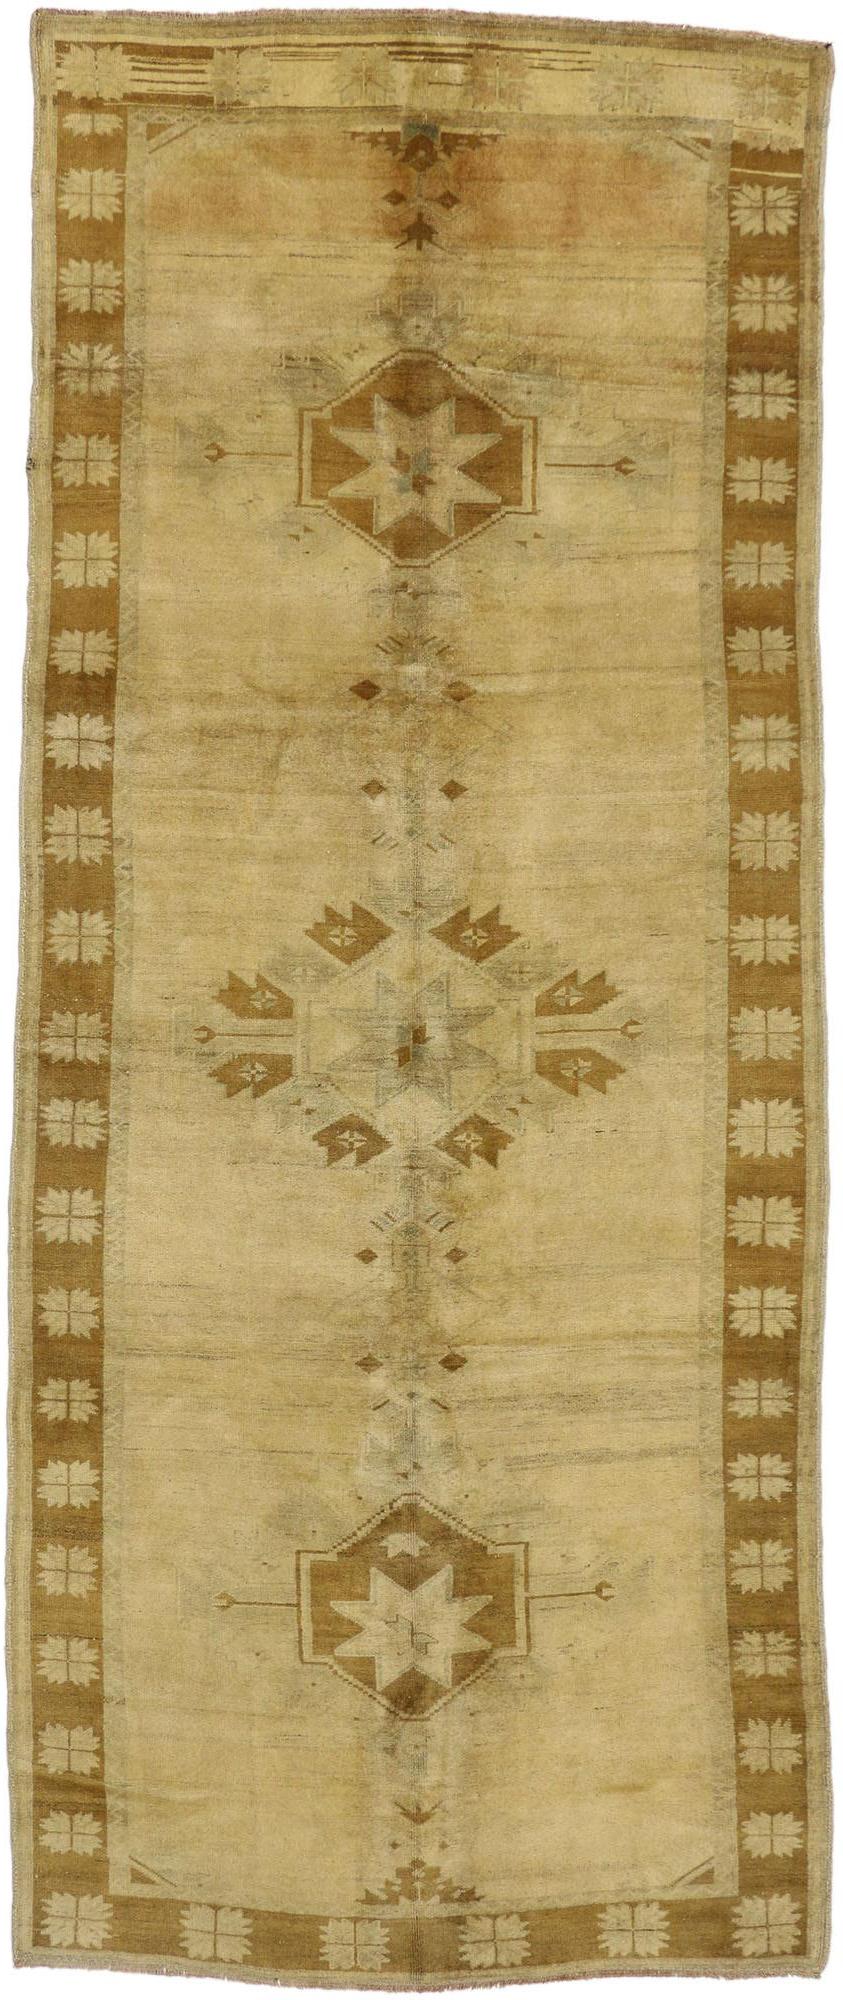 50447 Warm and Neutral Vintage Turkish Oushak Gallery Rug, Wide Hallway Runner 05'00 x 12'02. Soft and lustrous, the beauty of this Rustic style vintage Turkish Oushak runner lies in the timeworn abrash. Organic striations of color run along the